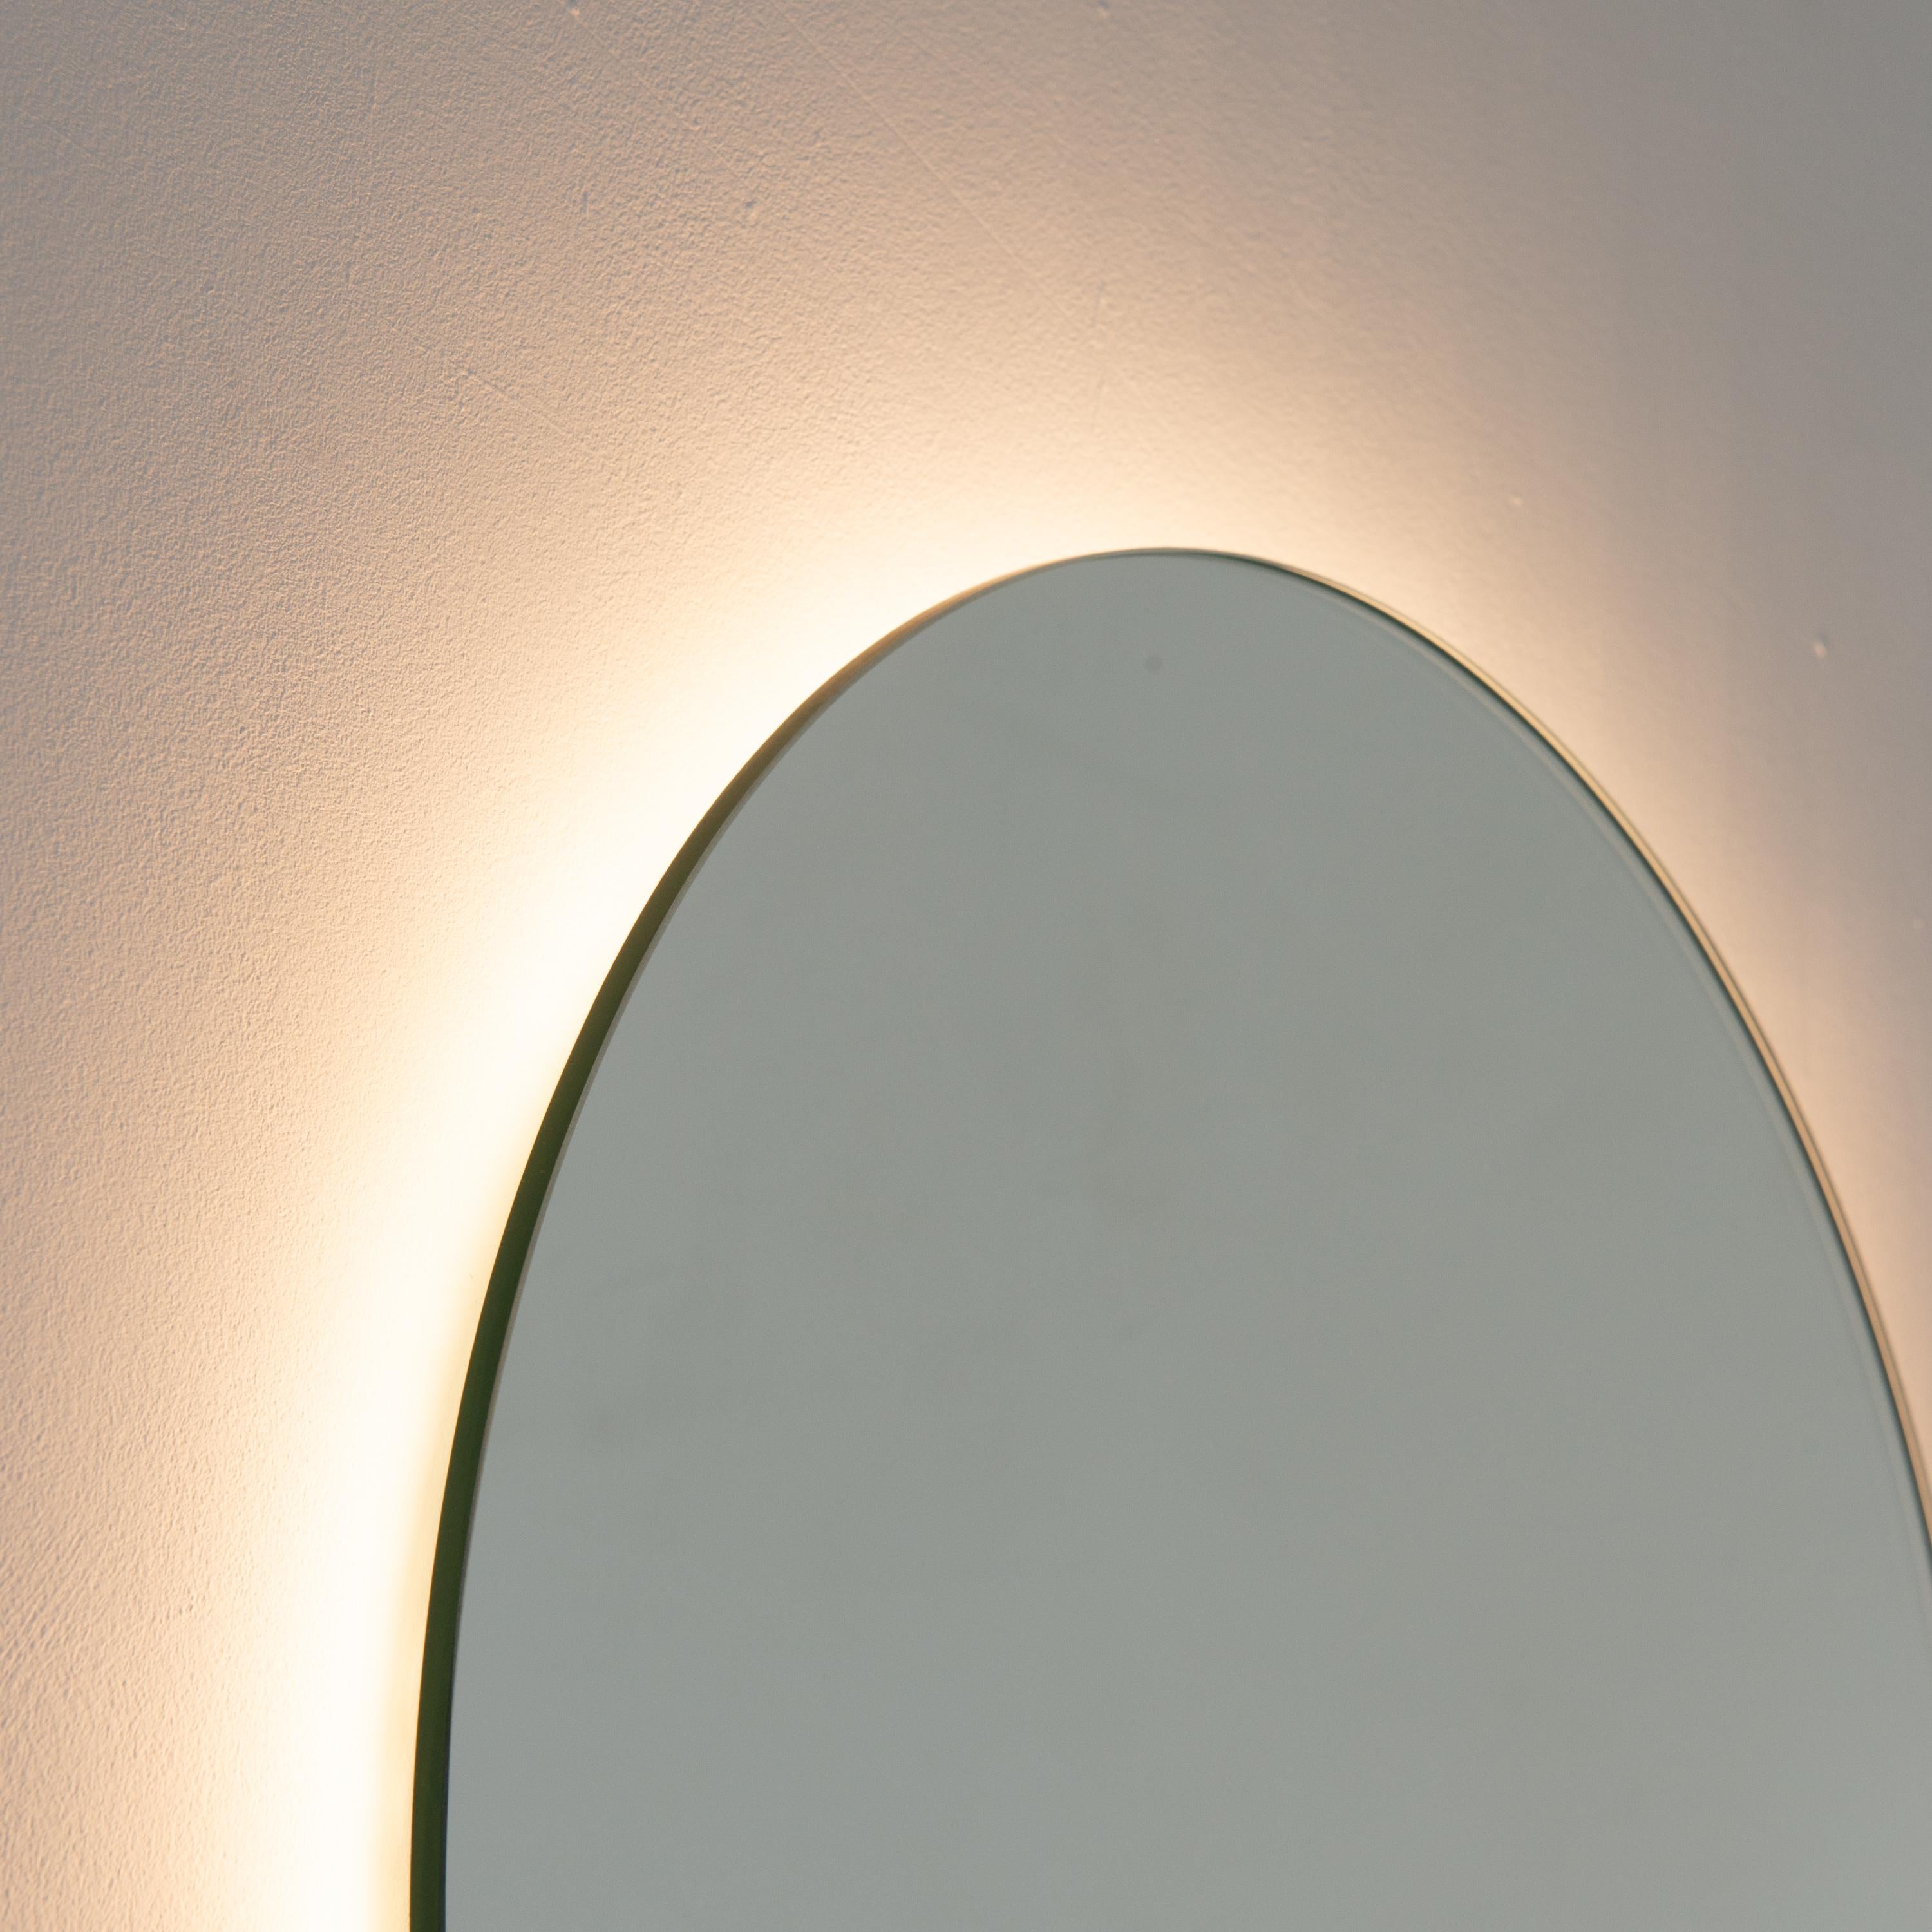 Orbis Back Illuminated Round Contemporary Frameless Mirror, Customisable, Large For Sale 1